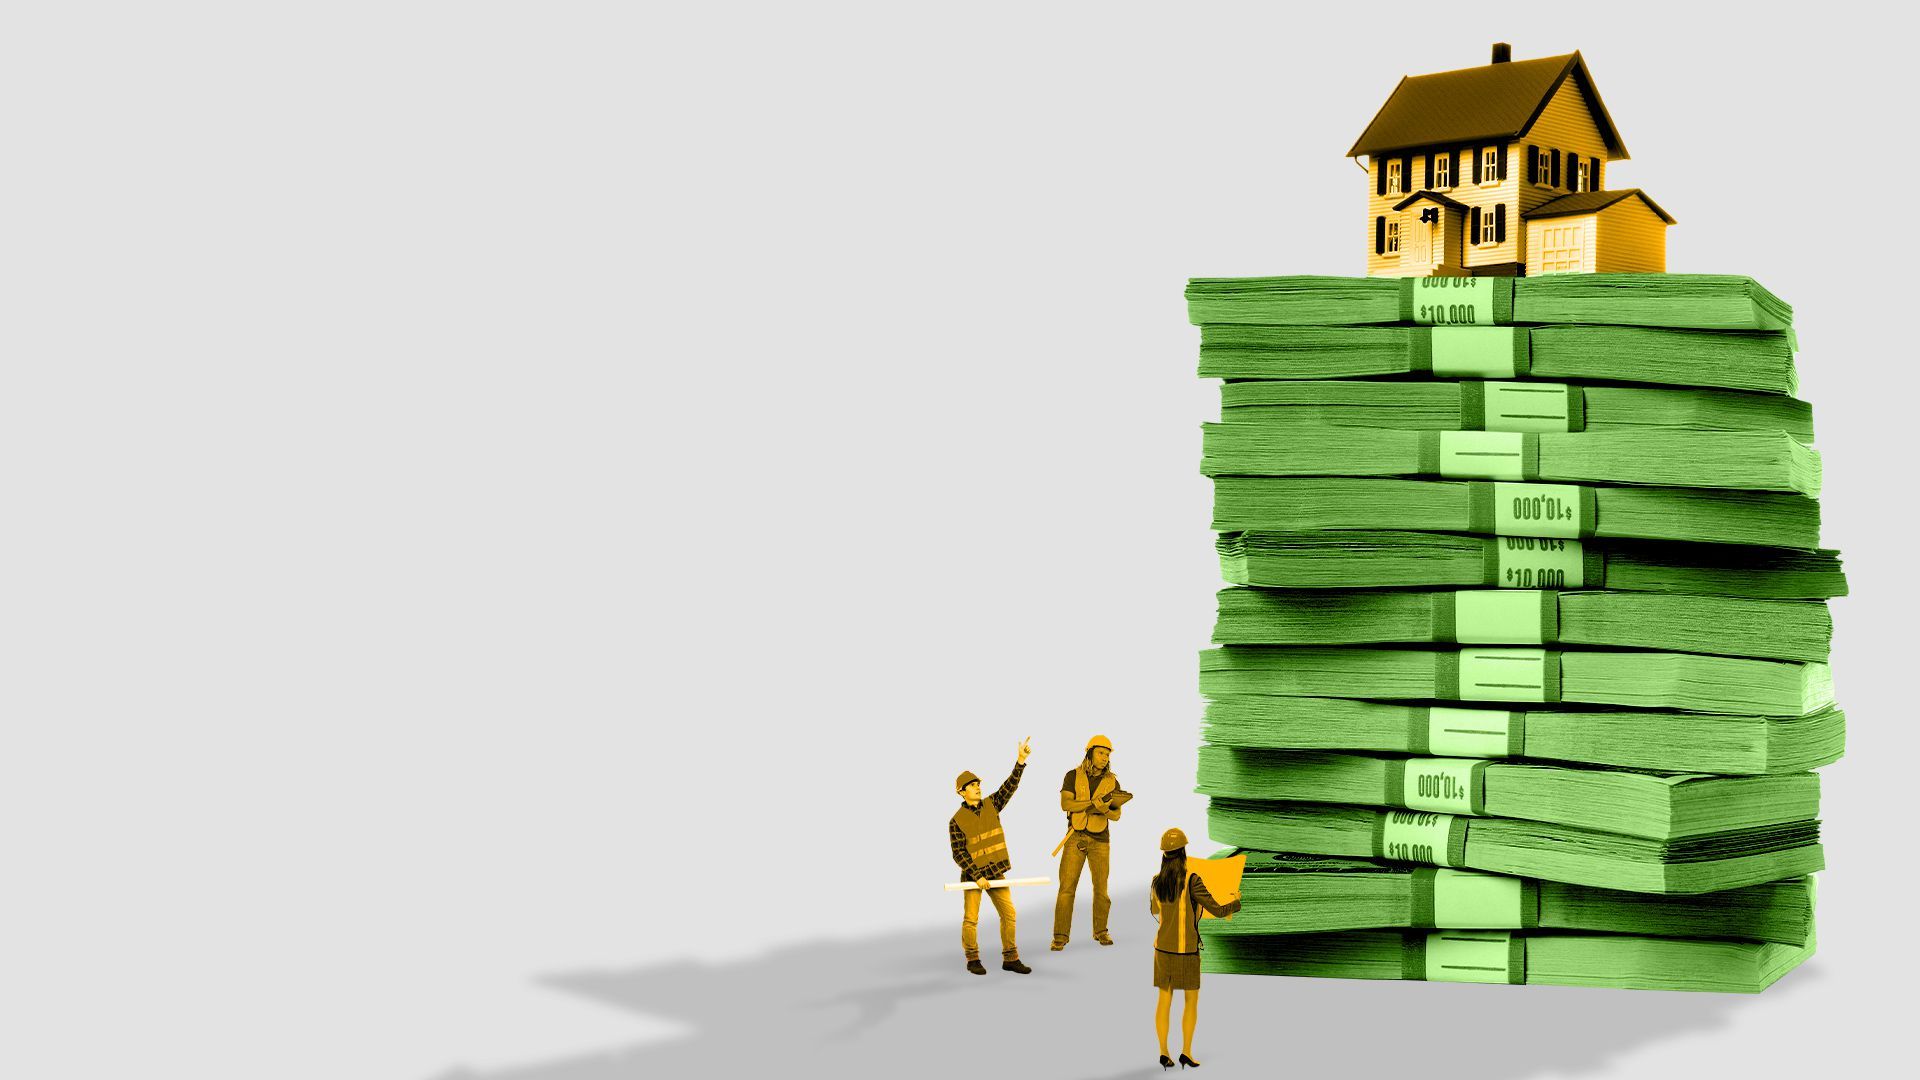 Illustration of construction workers analyzing a house on top of a stack of money.